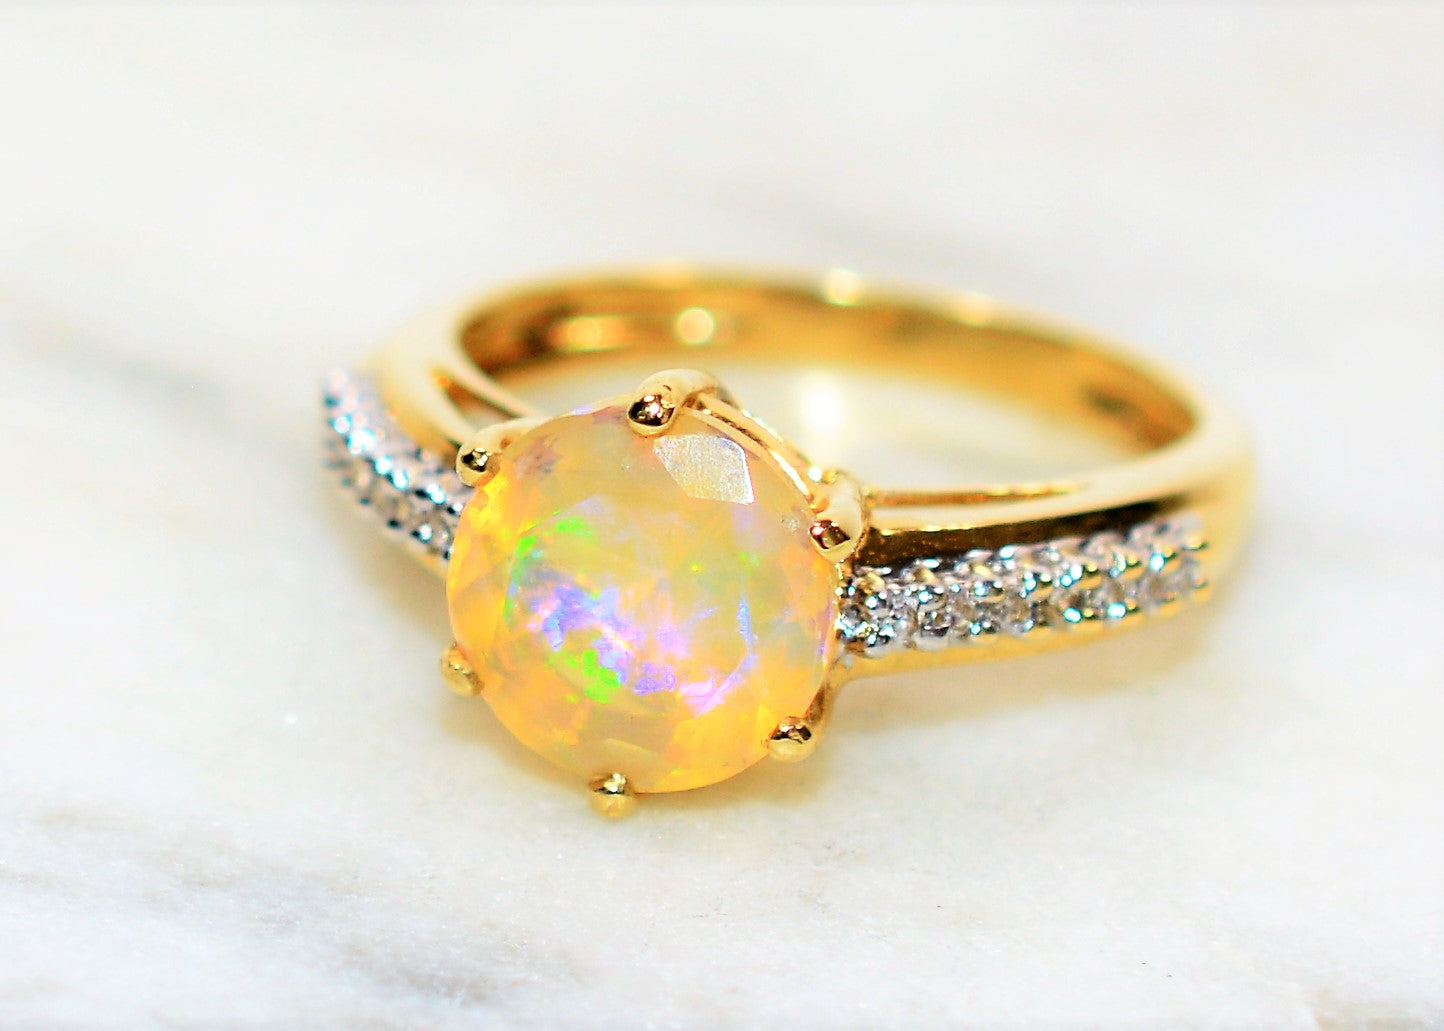 Natural Jelly Opal & Diamond Ring 14K Solid Gold 1.28tcw Gemstone Ring Women's Ring Birthstone Ring Engagement Ring Fine Jewelry Jewellery